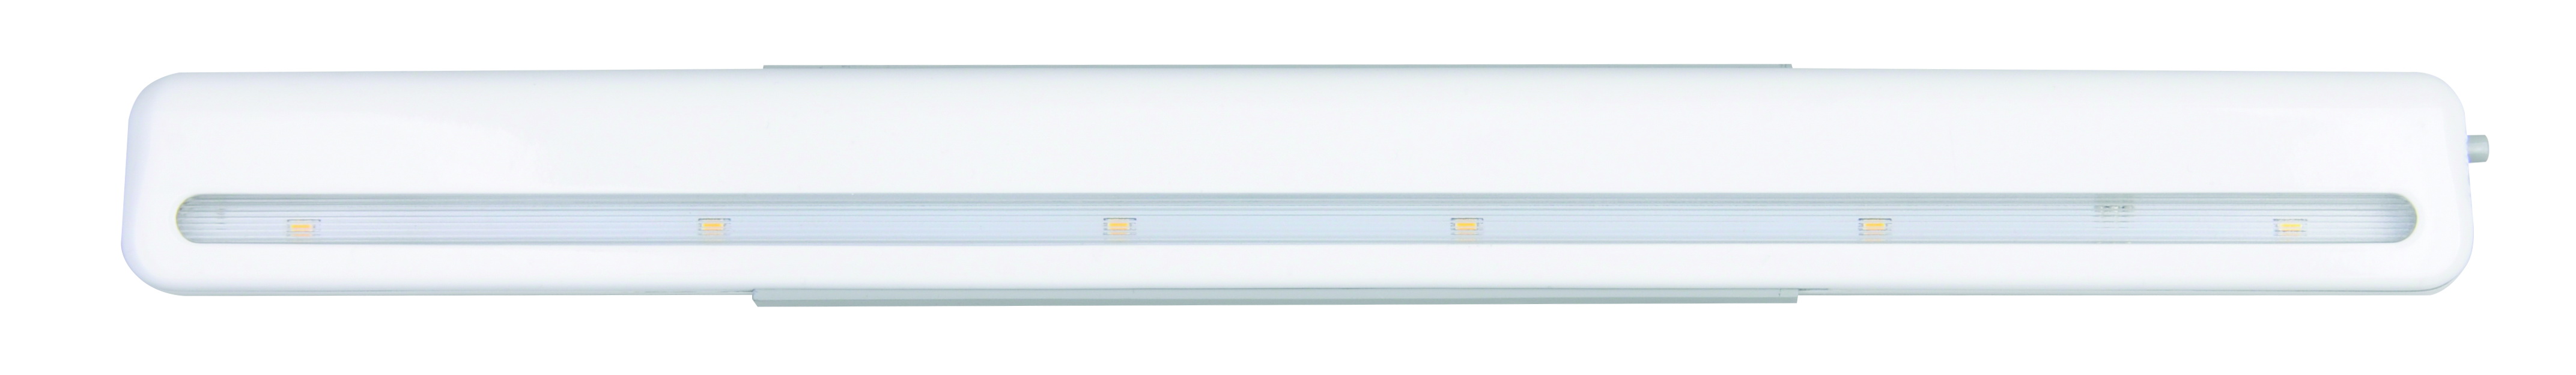 PLAF. A LED LINO A BATTERIA - 30LM - ON/AUTO/OFF SWITCH MAGNET LUCE MEDIA 4000K IP20